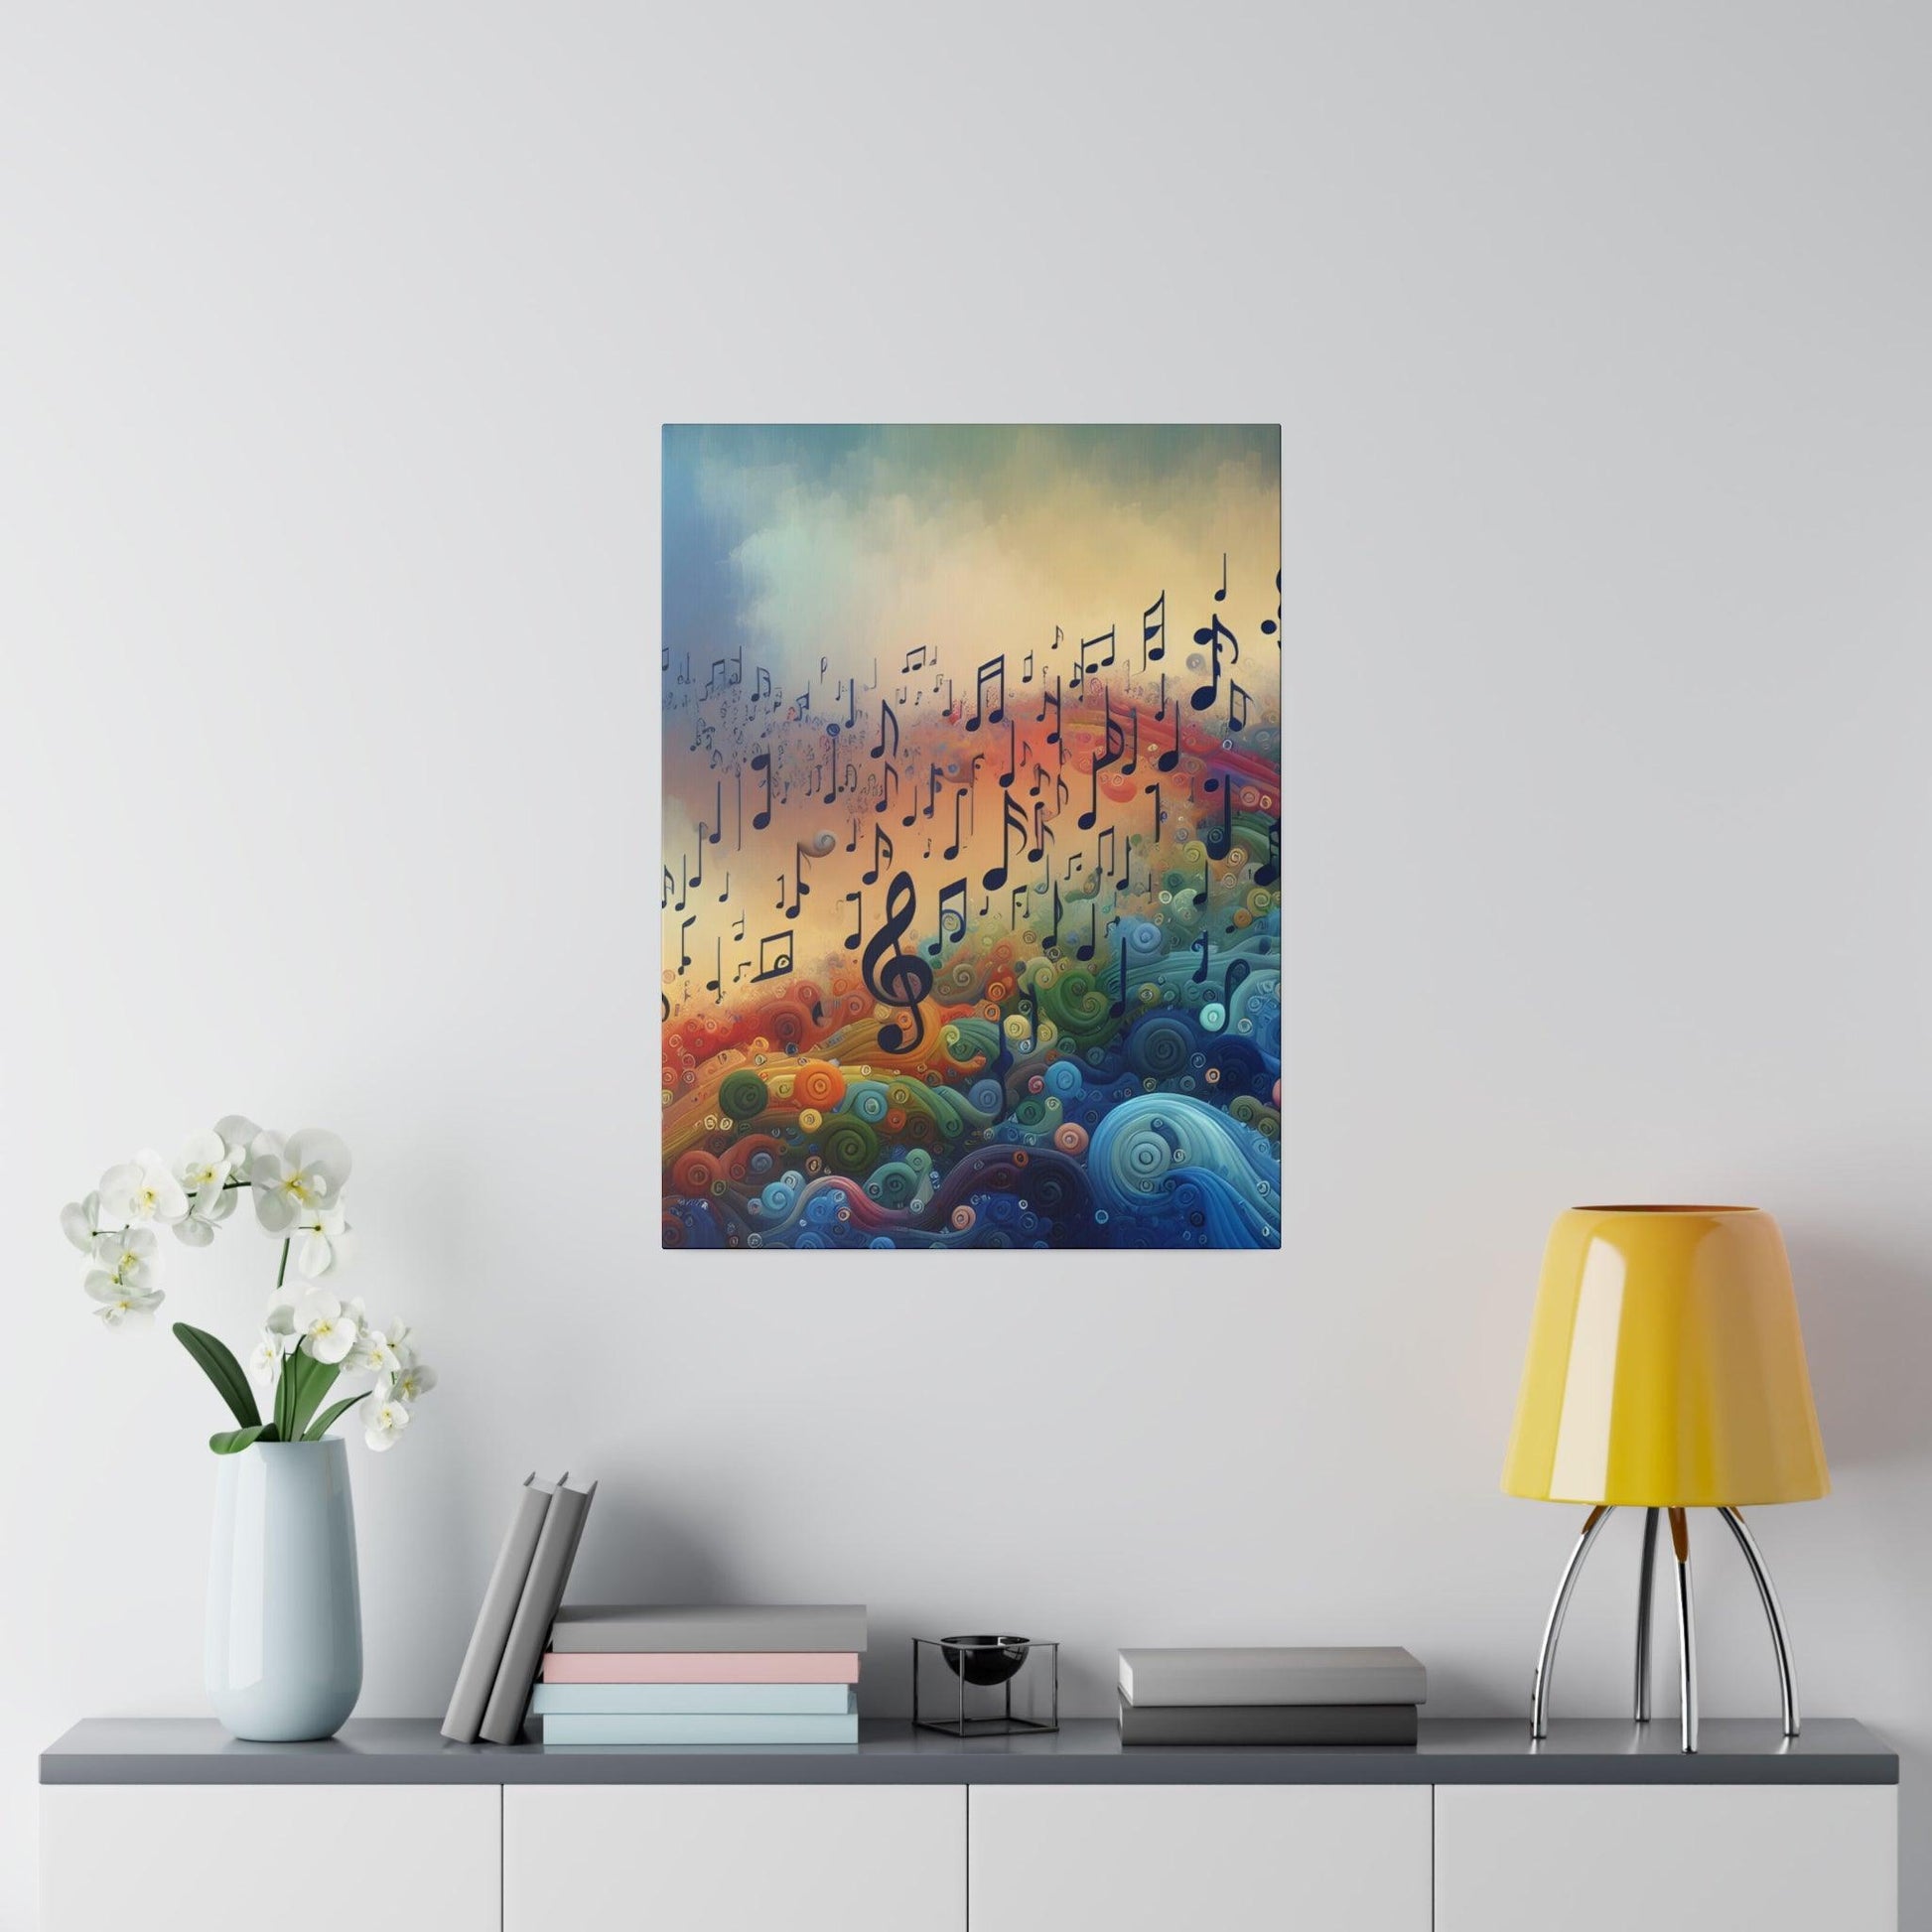 "Melodic Muse: Music Note Masterpiece Canvas Wall Art" - The Alice Gallery